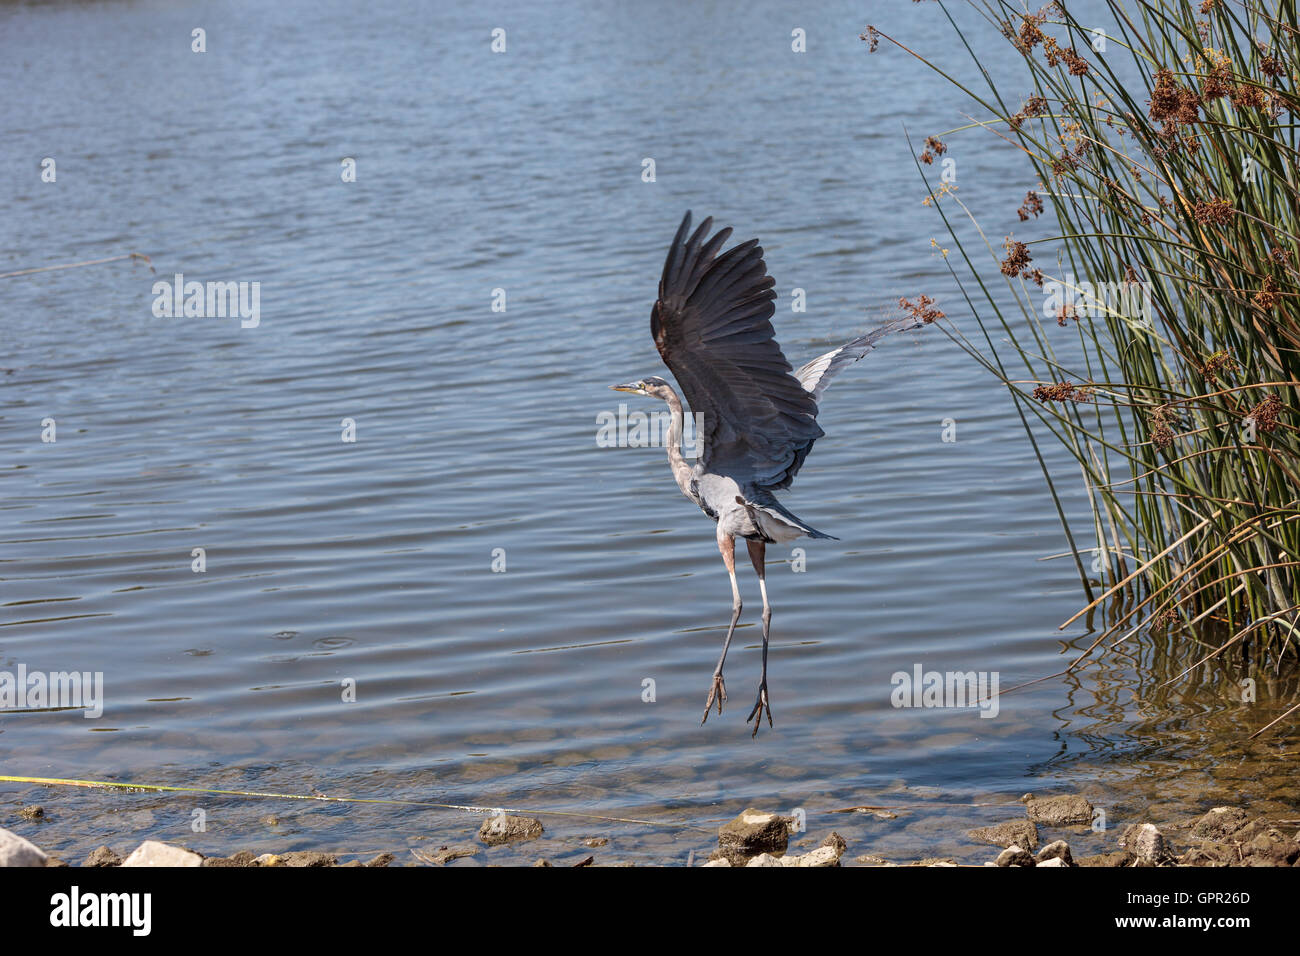 Great blue heron bird, Ardea herodias, in the wild, taking off to fly at a marsh in Bolsa Chica wetlands in Huntington Beach, Ca Stock Photo